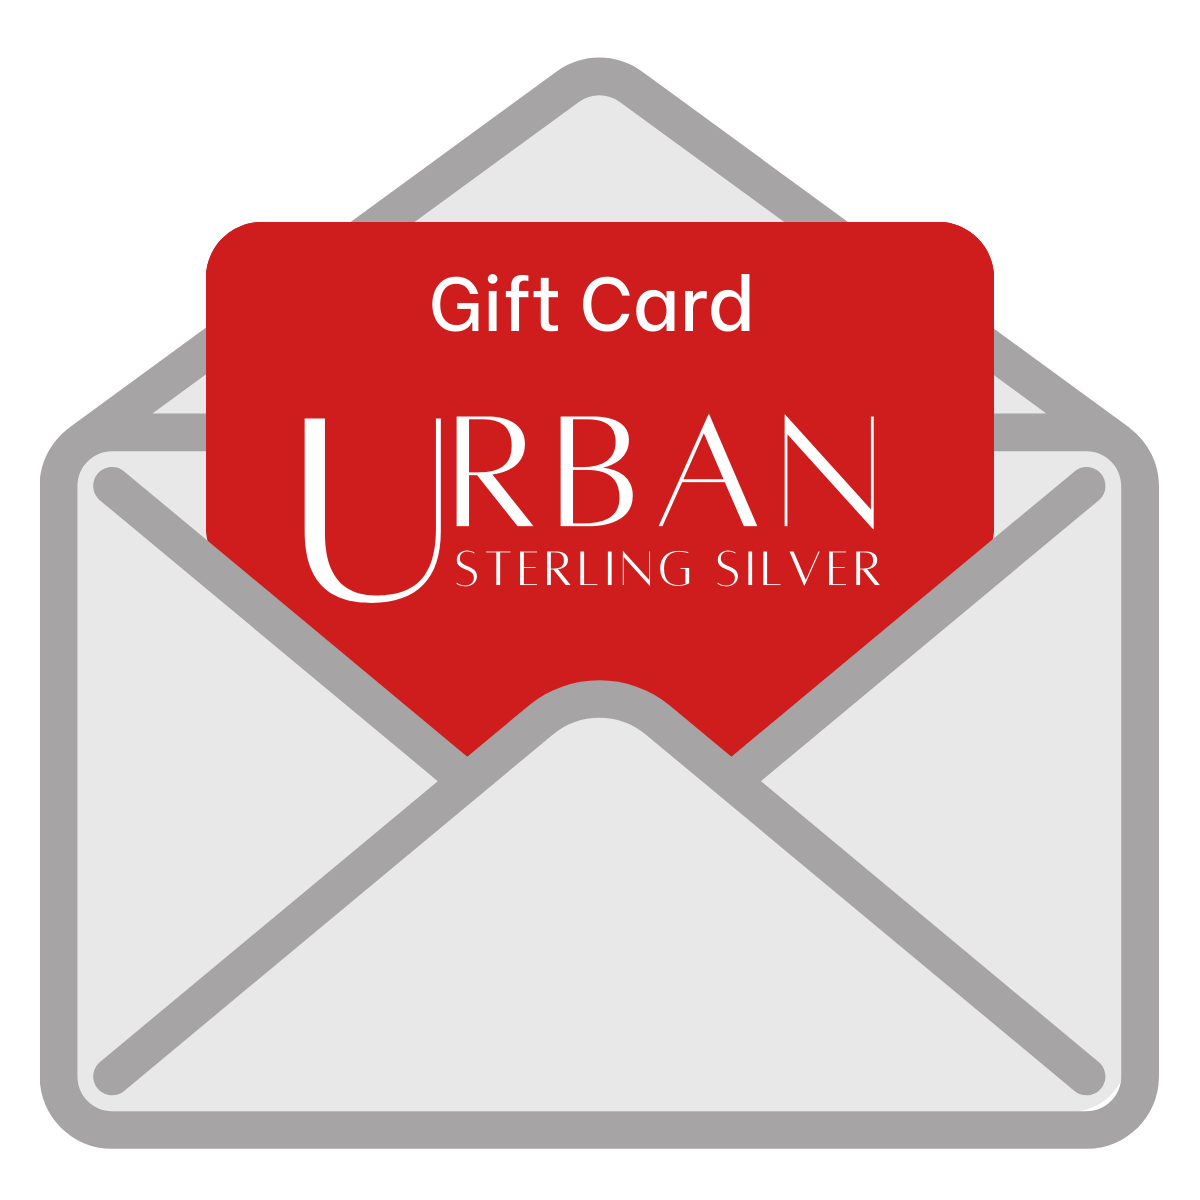 URBAN STERLING SILVER GIFT CARD